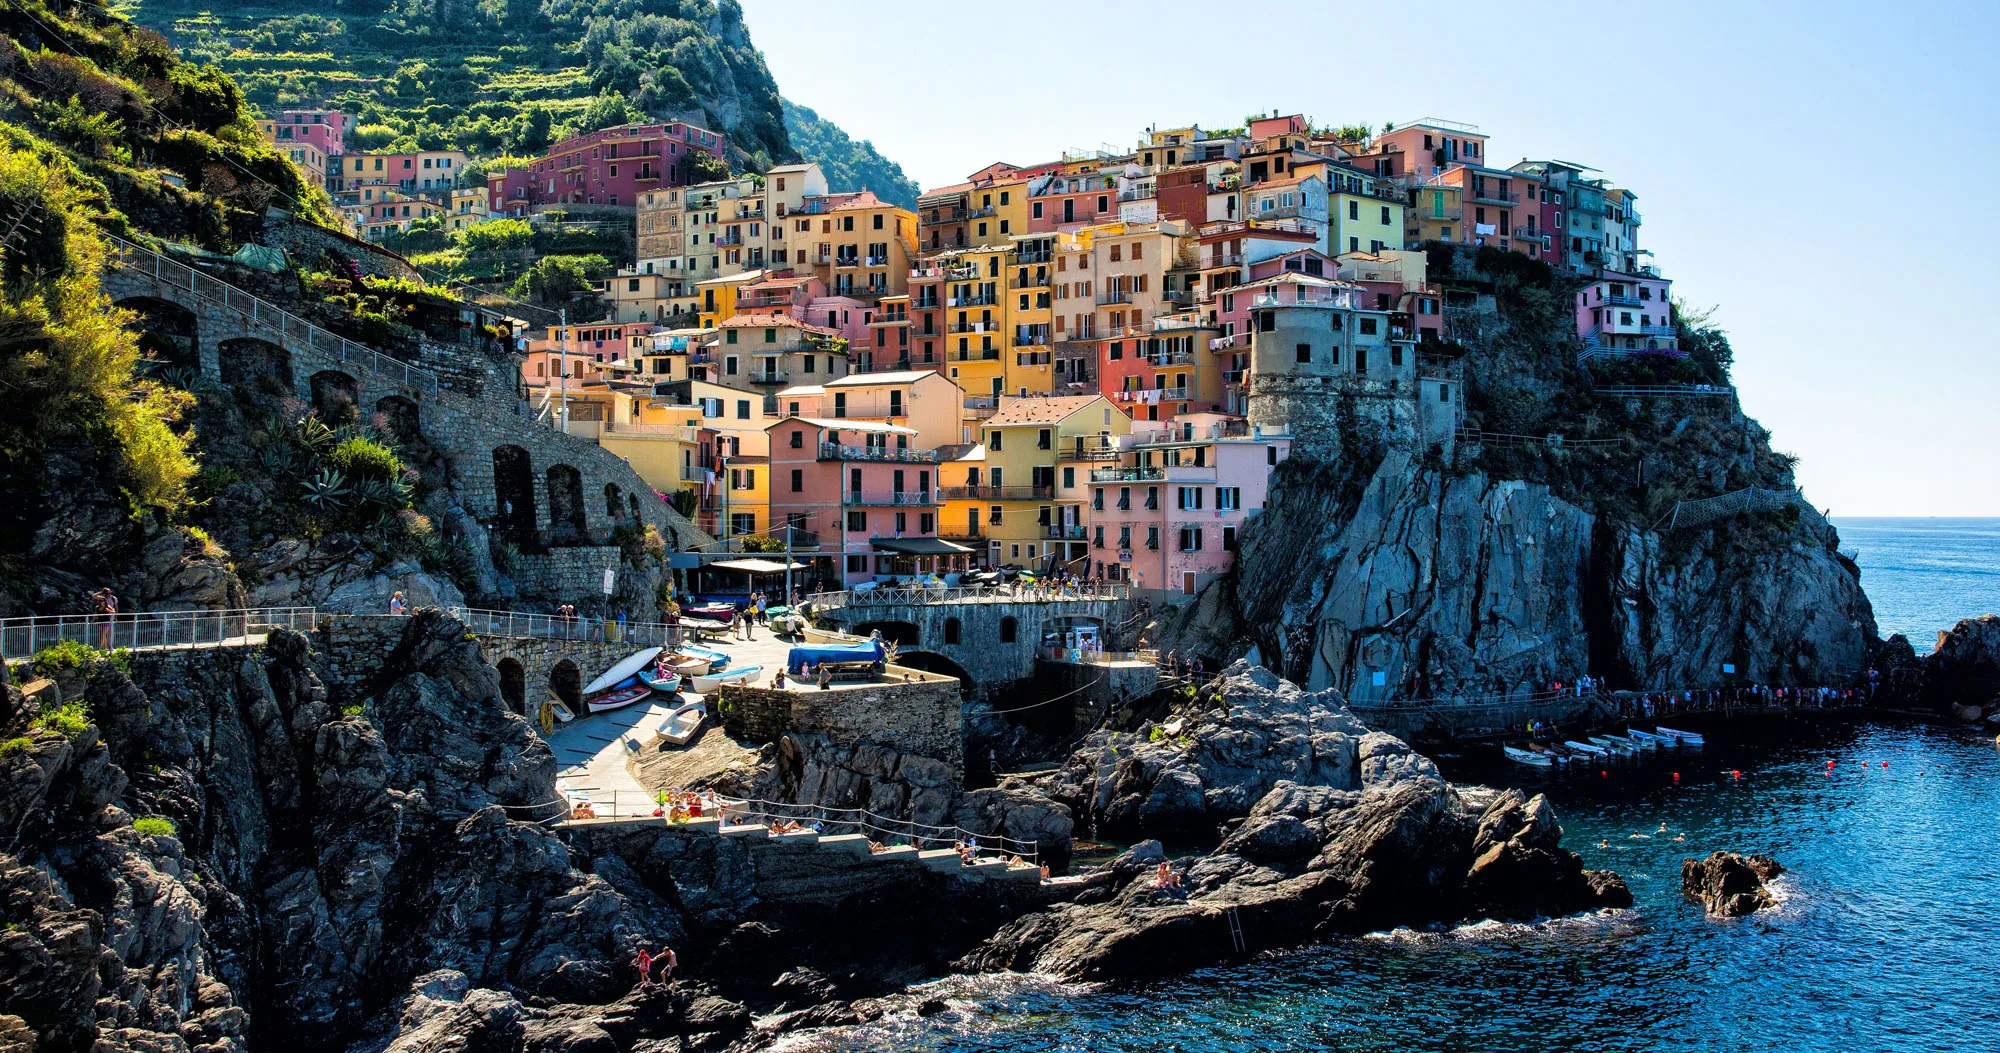 Featured image for “Hiking the Cinque Terre: What You Need to Know”